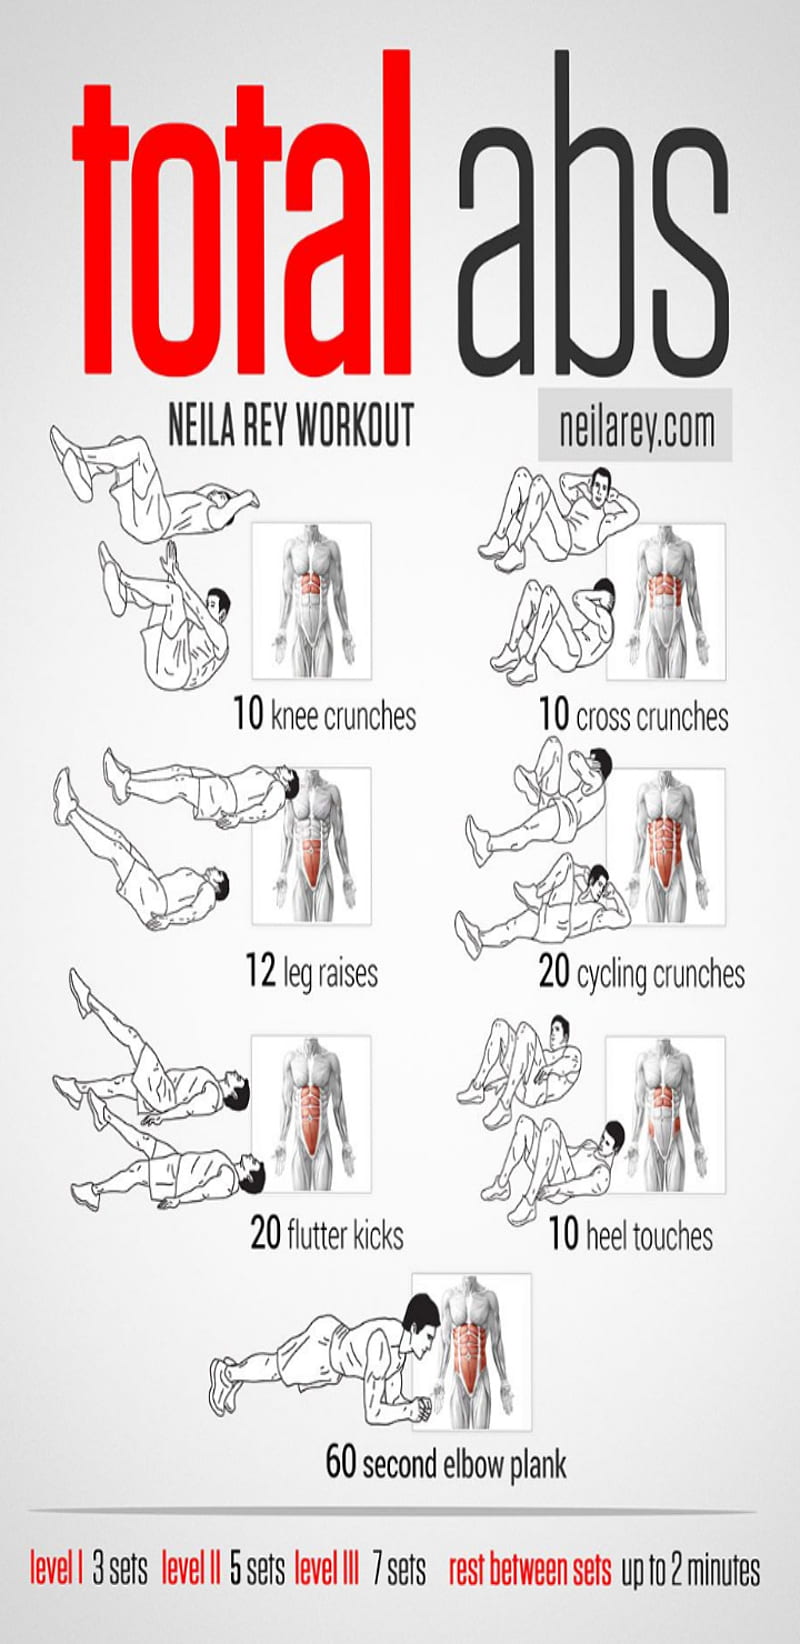 Total Abs Workout